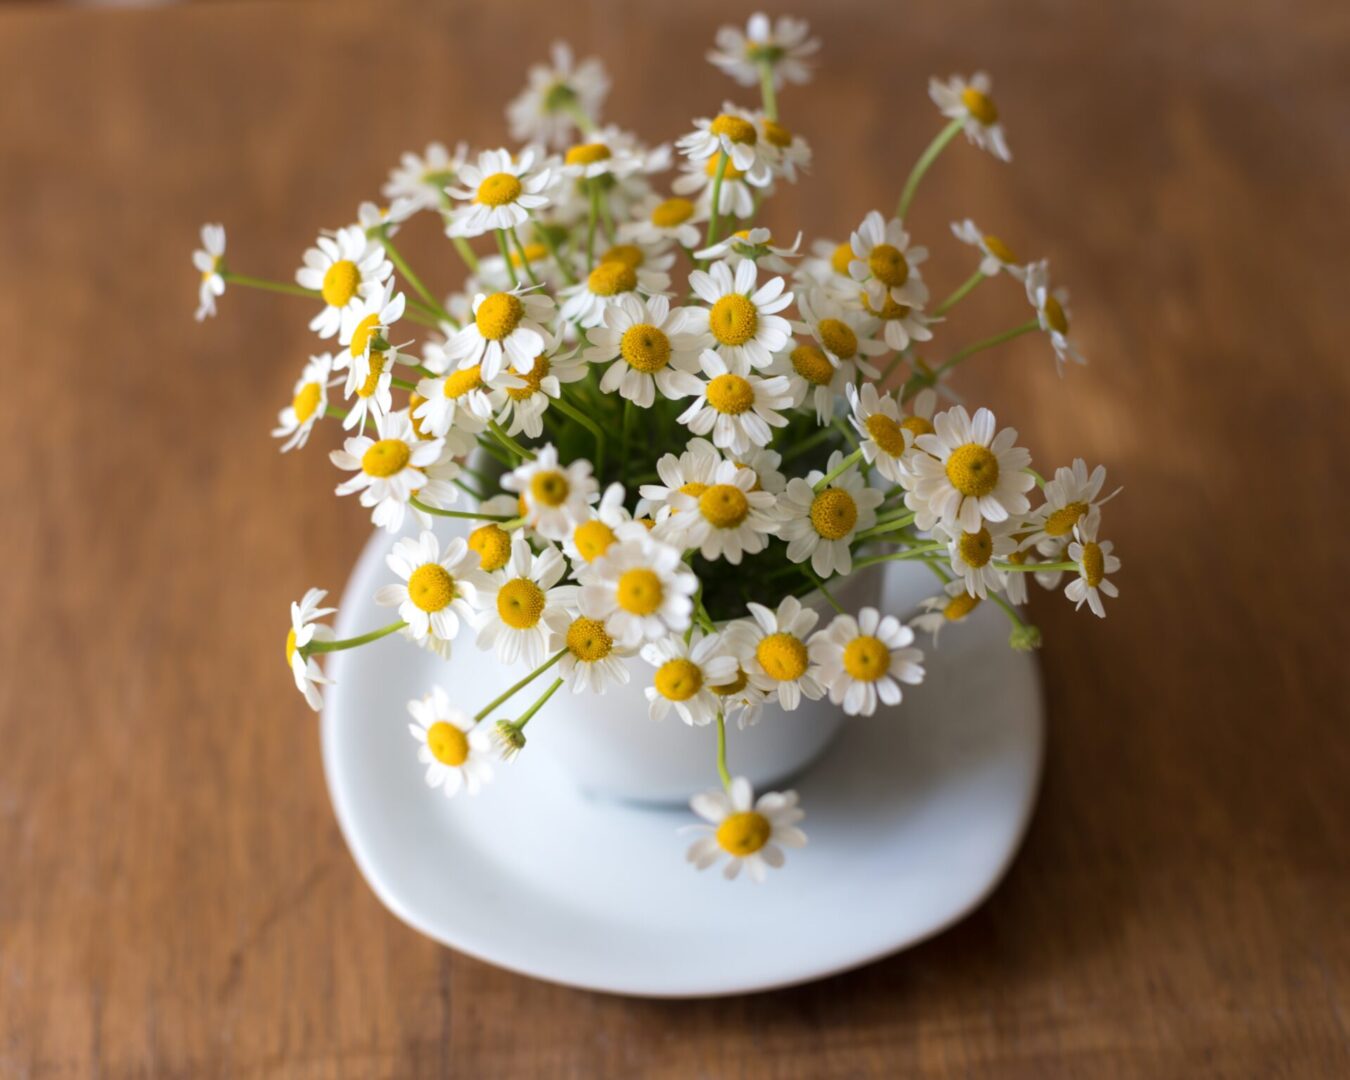 A white cup with some yellow flowers in it